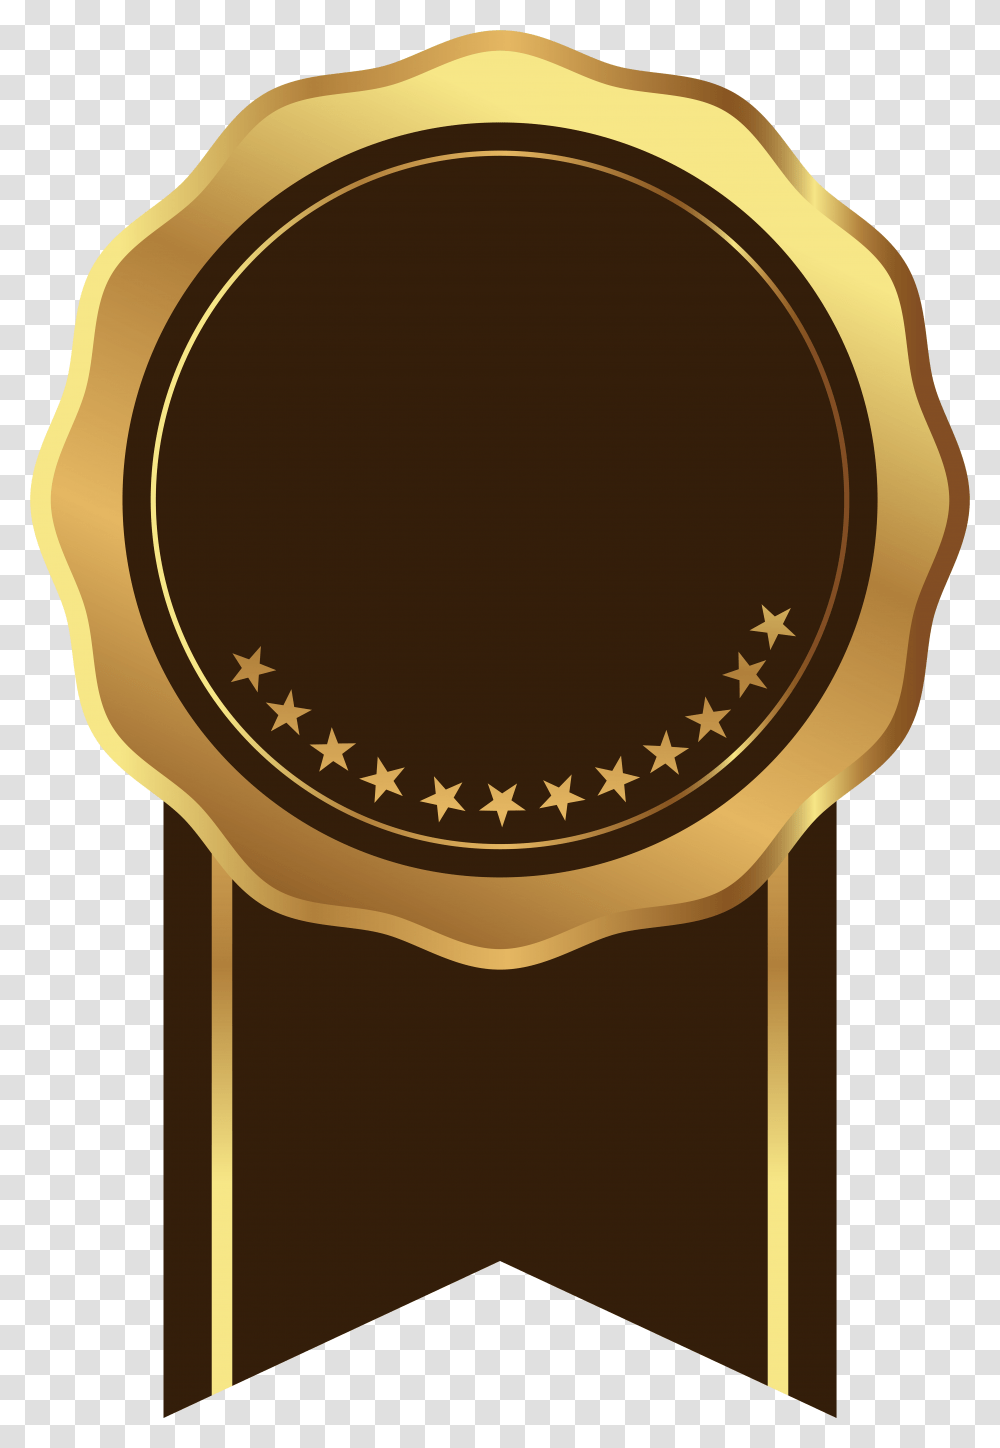 More Gold Seal Background Gold Black Badge Pngs, Lamp, Trophy, Wristwatch, Gold Medal Transparent Png